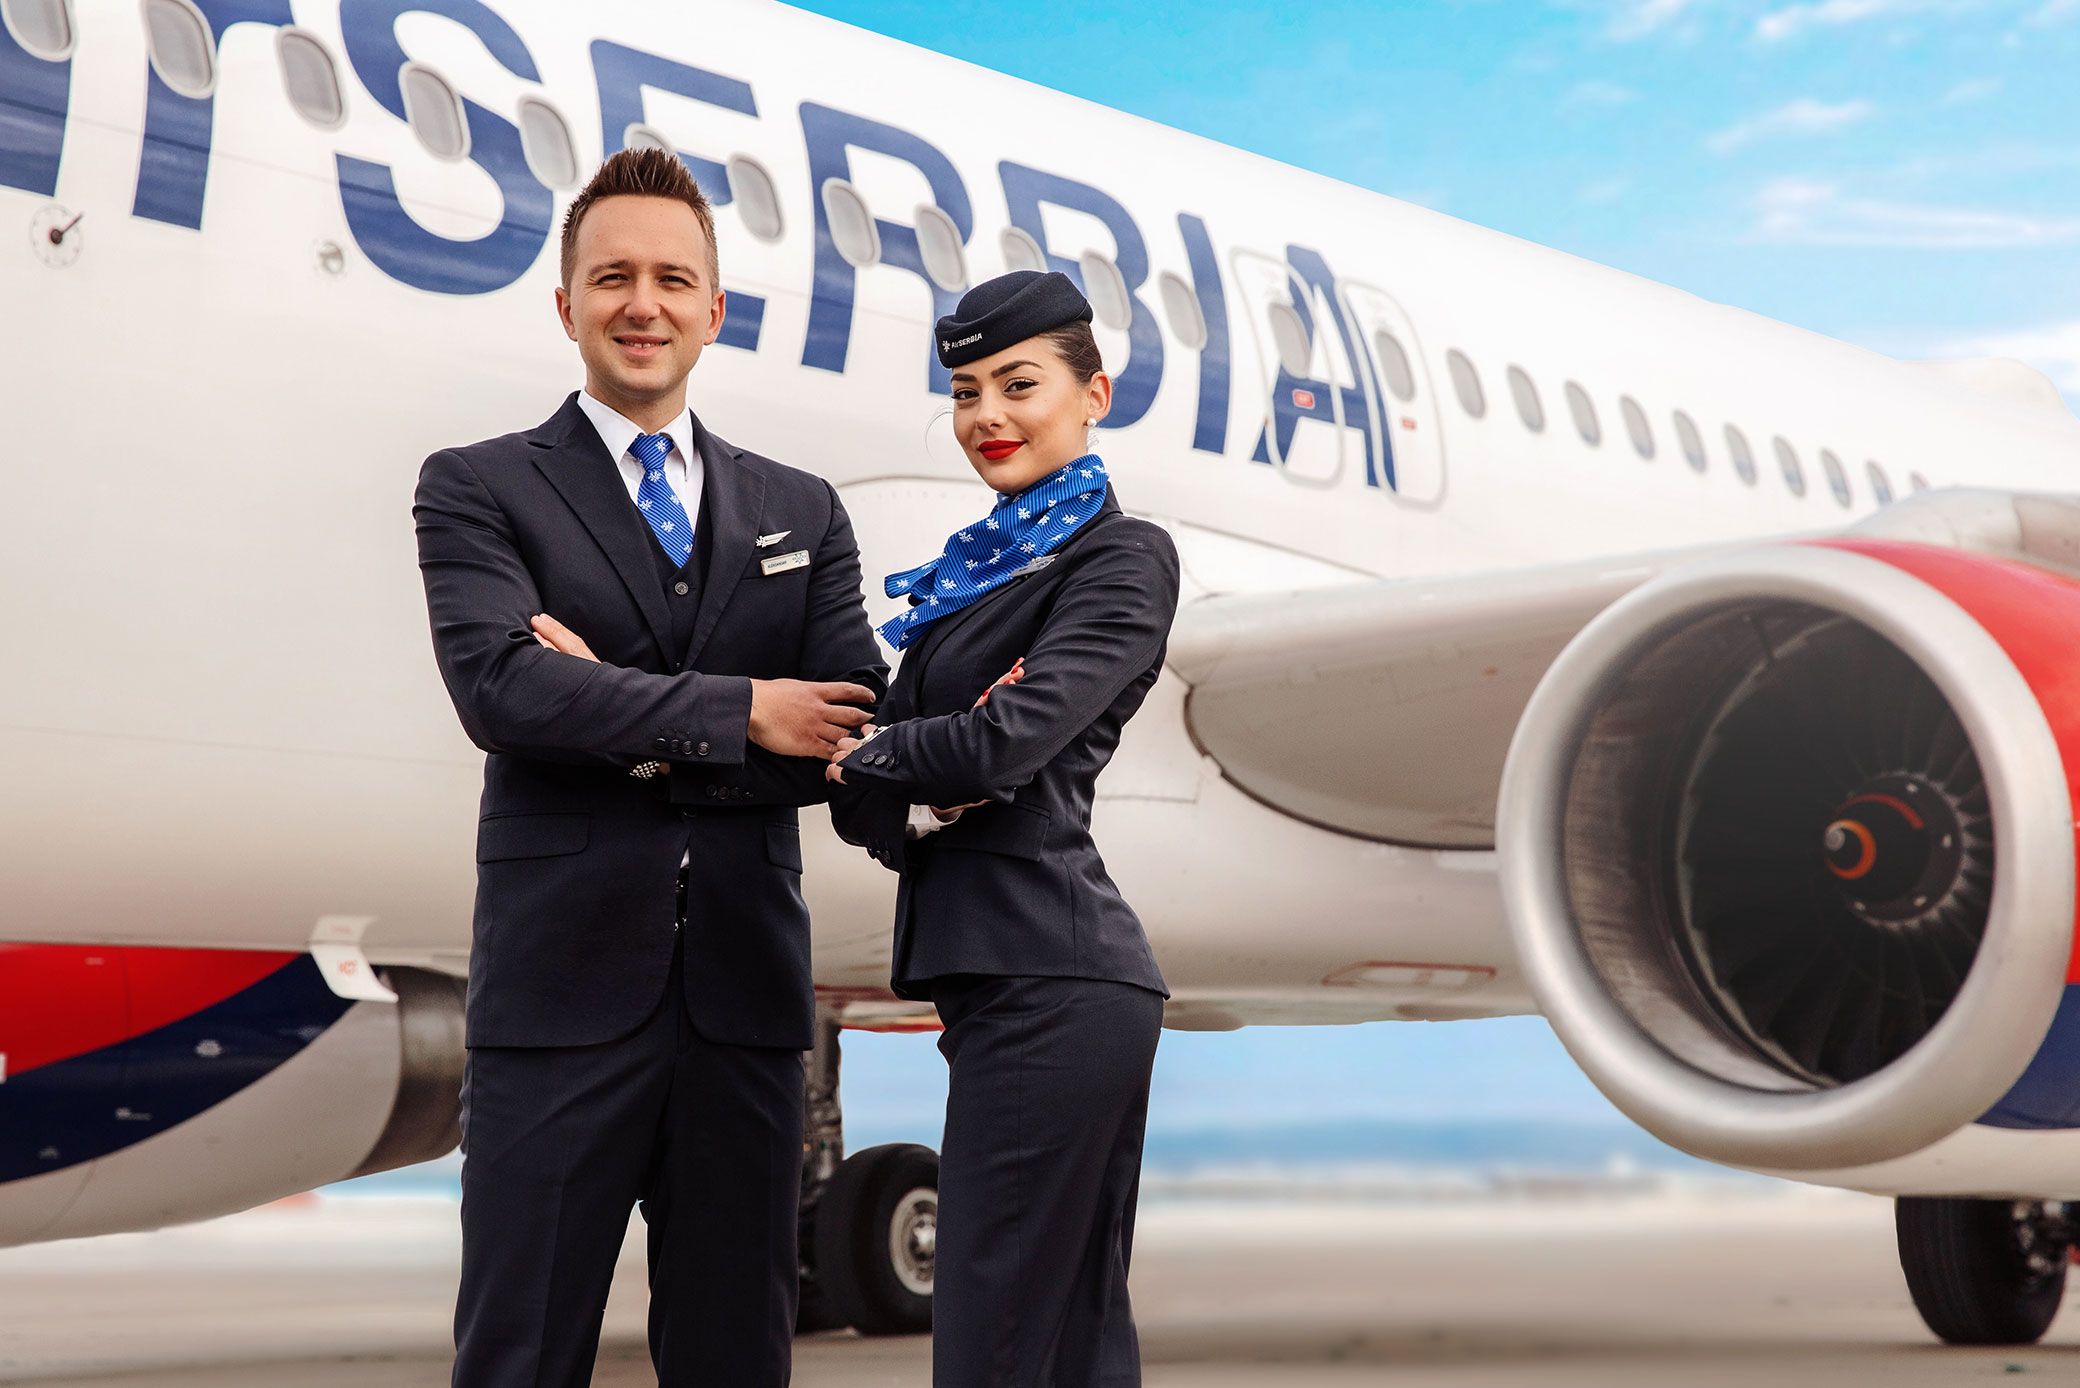 Two Air Serbia cabin crew standing outside an aircraft.